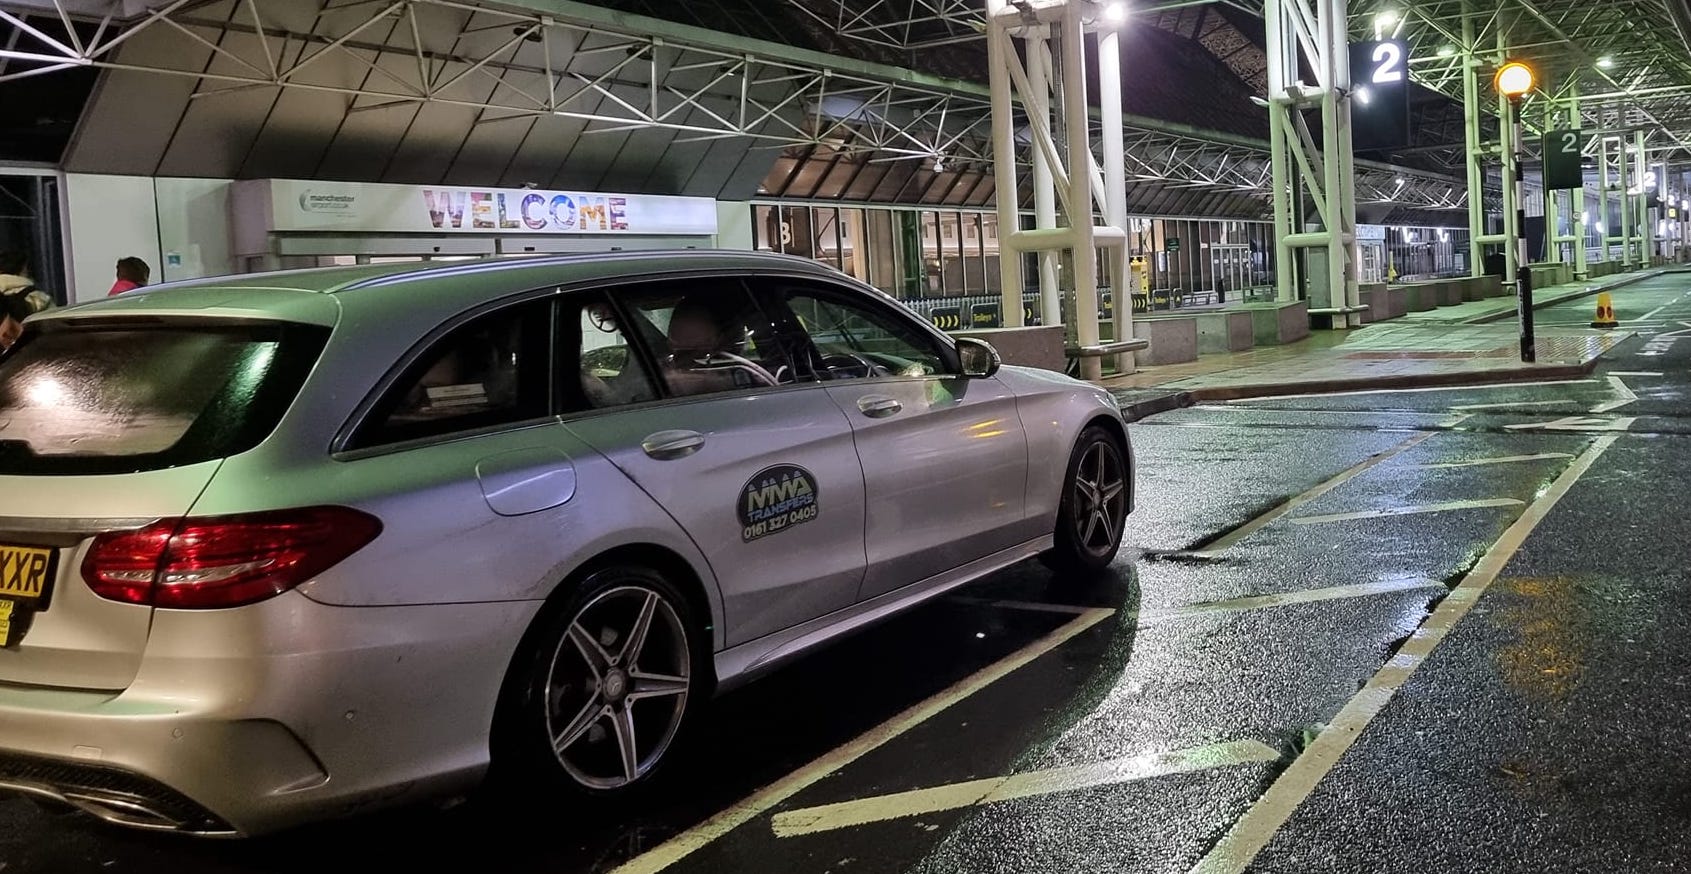 Take a Taxi from Manchester Airport to Hale with a free Meet and Greet Service